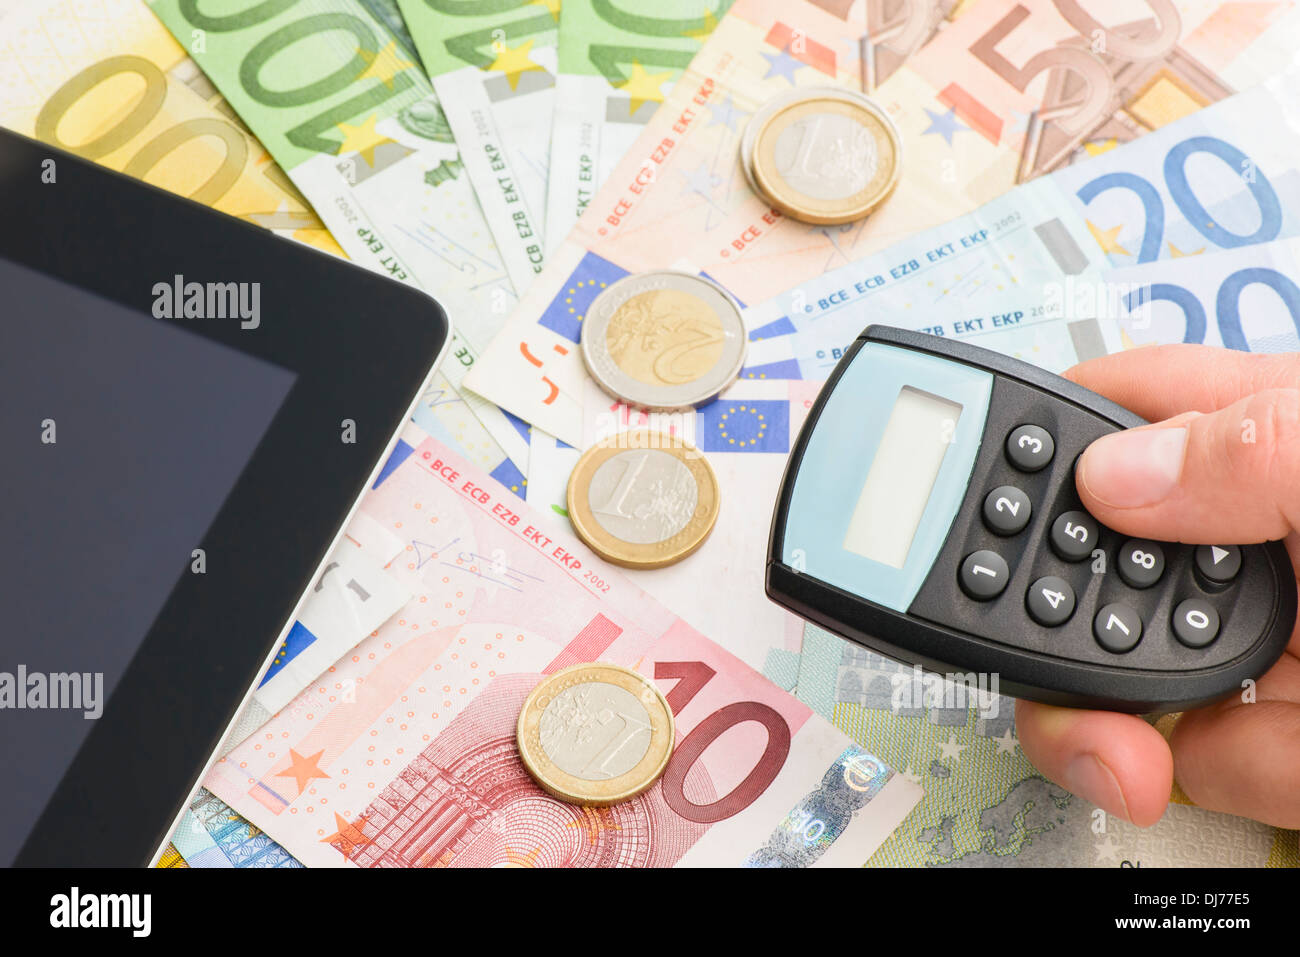 Close-up of euro currencies and internet banking device Stock Photo